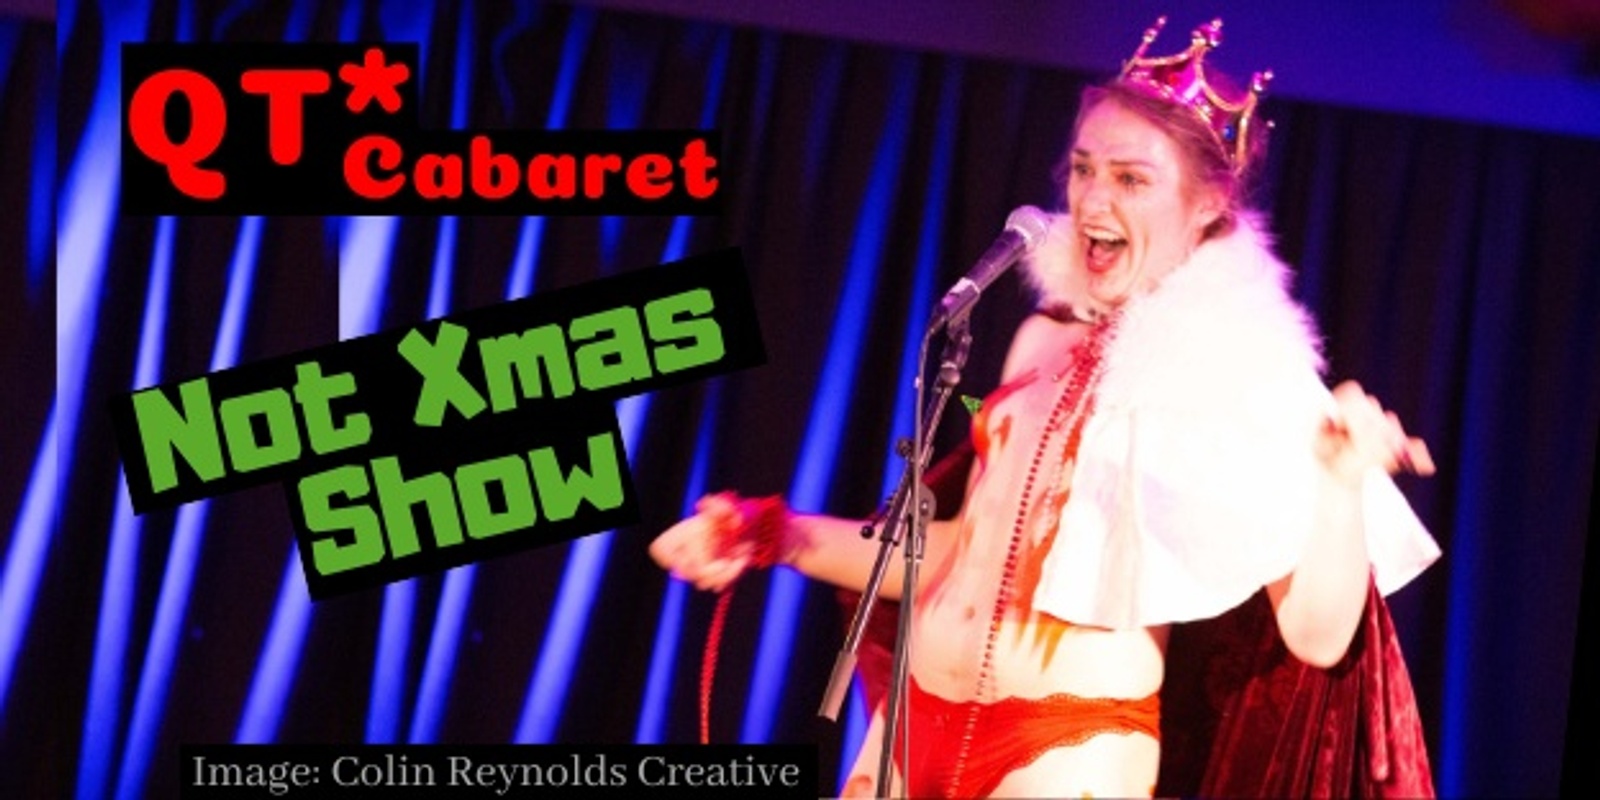 Banner image for QT* Not Xmas Show